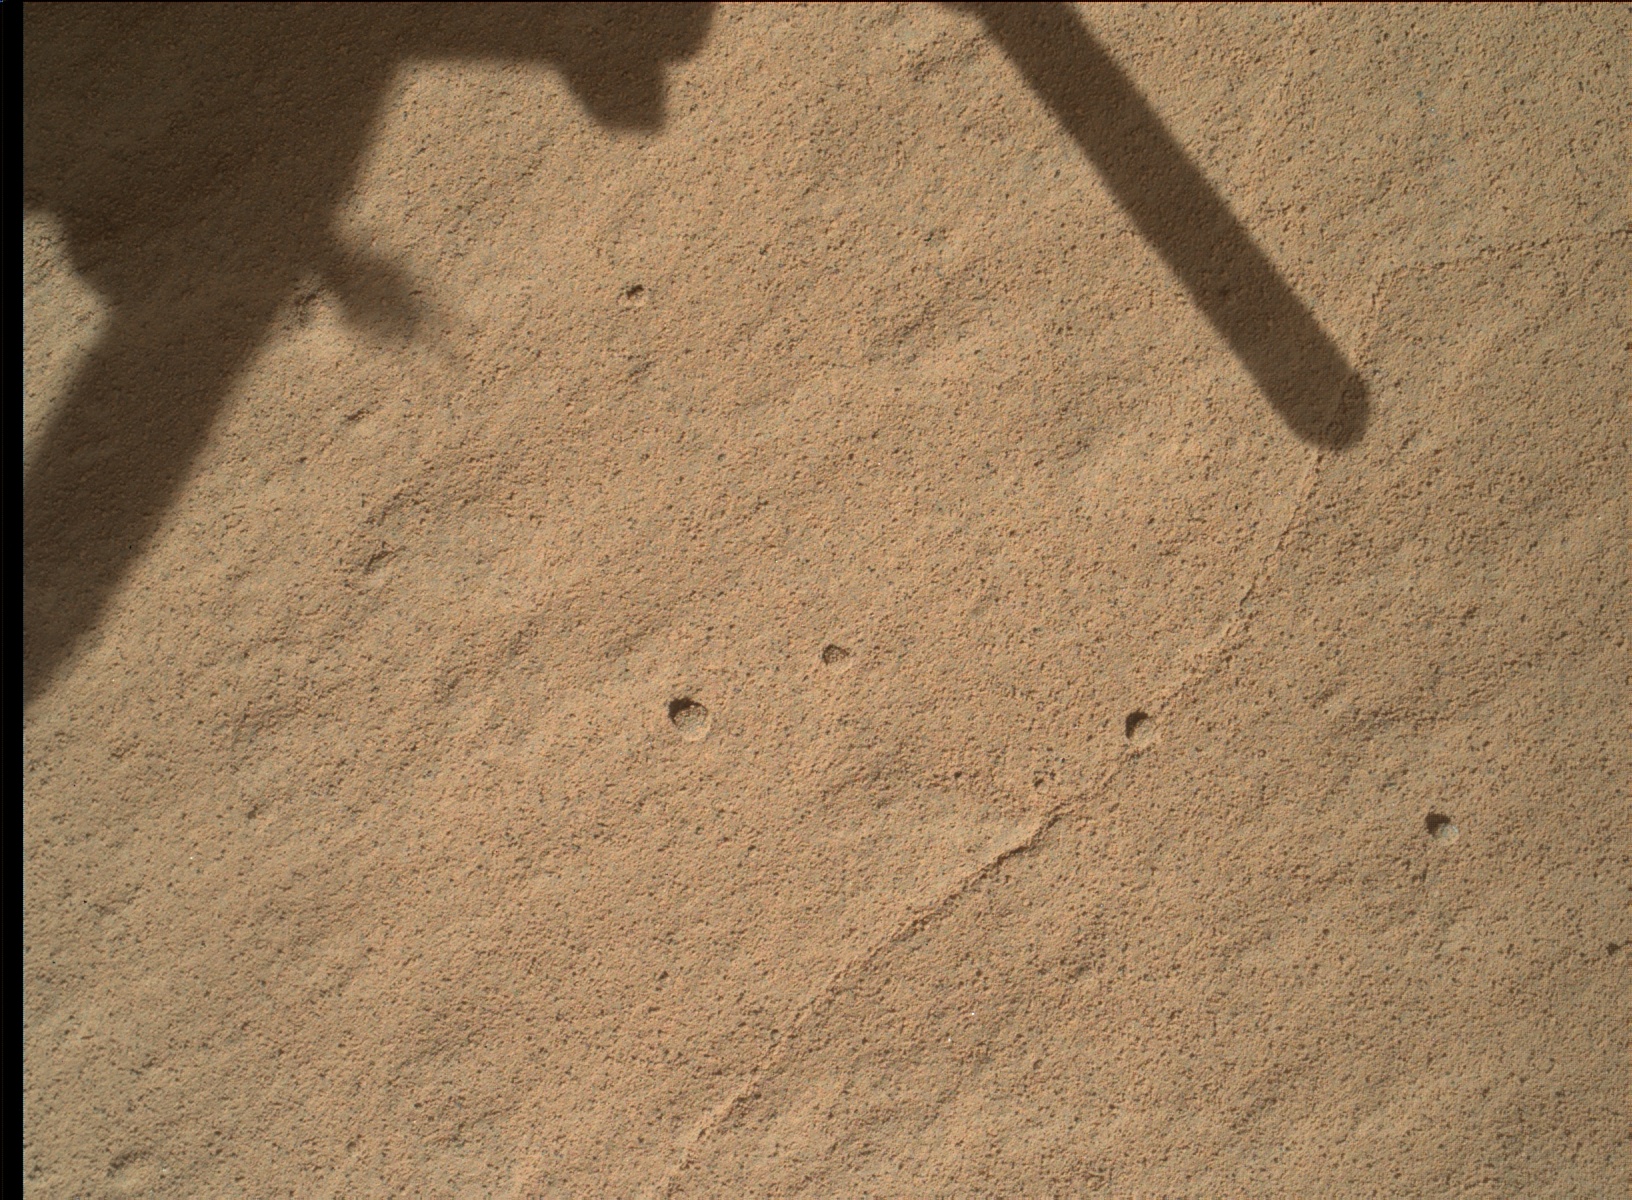 Nasa's Mars rover Curiosity acquired this image using its Mars Hand Lens Imager (MAHLI) on Sol 612, at drive 1330, site number 31